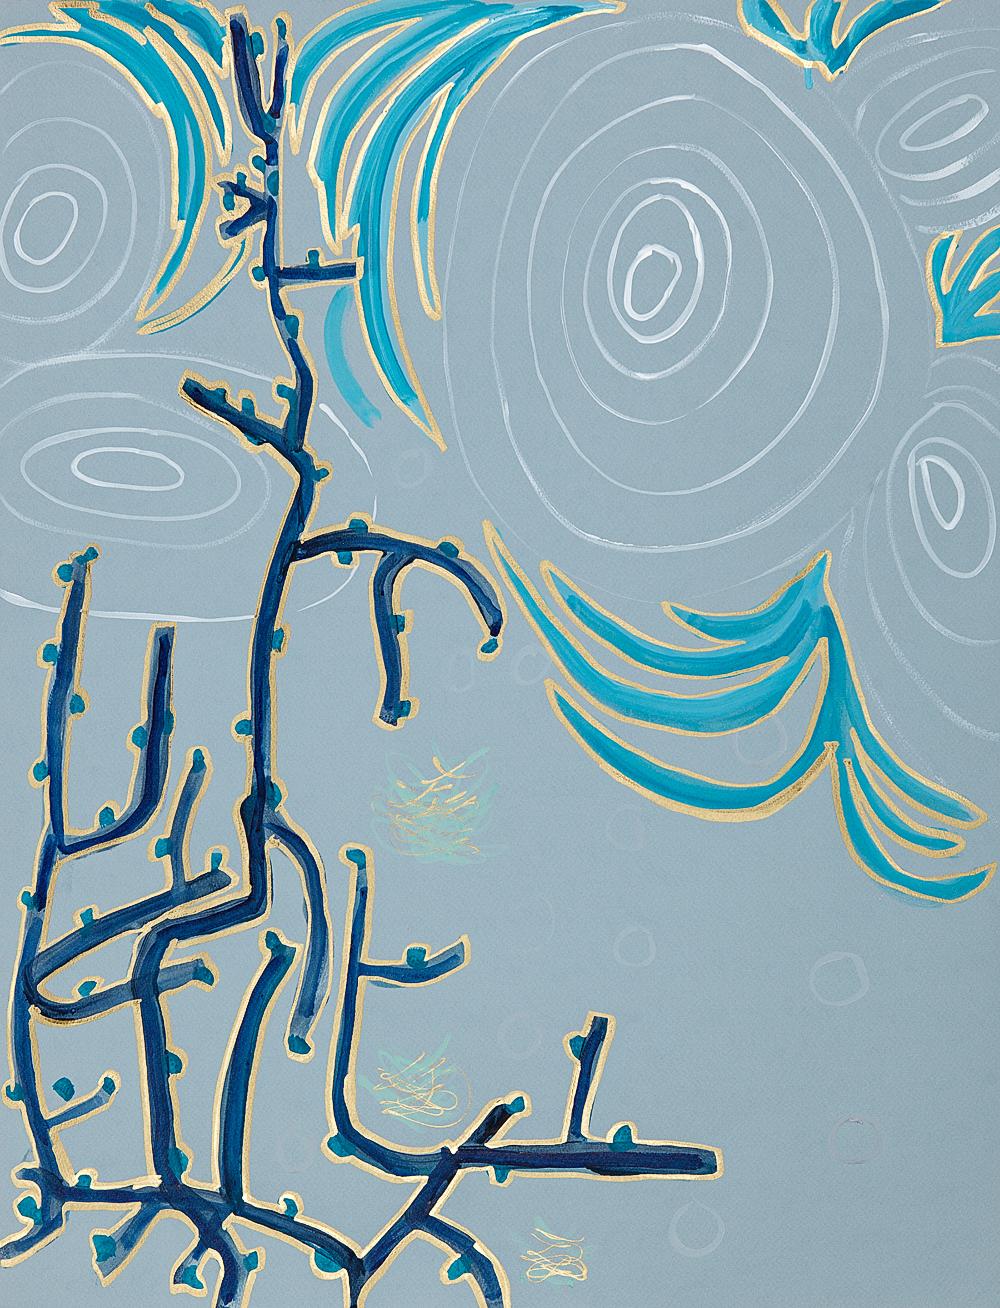 Abstracting Painting Alex K. Mason "Sea Folly Series D" Ink Acrylic Gouache on Blue Paper. Unframed, 25"H x 19.5"W.  Black, Blue, Turquoise, Gold, White, 2013
It is the expression of making marks for canvas or paper, which reveals itself to me in